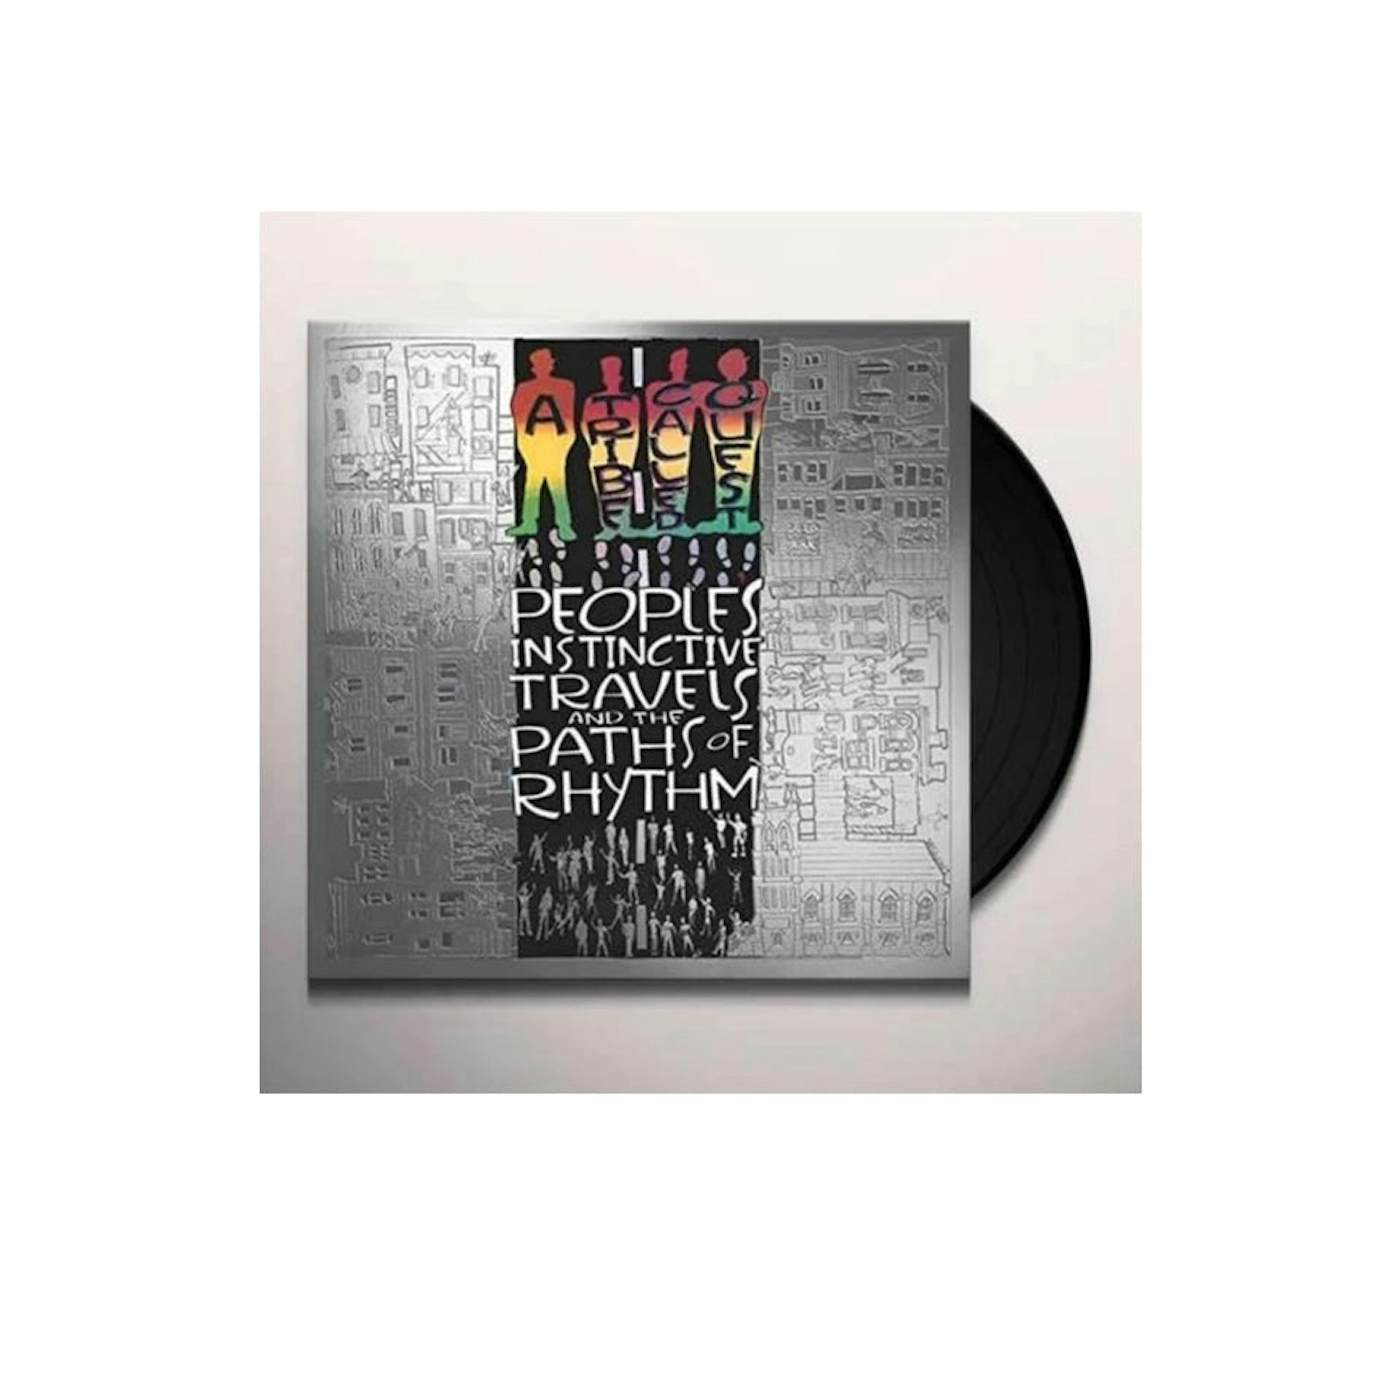 A Tribe Called Quest LP Vinyl Record - People's Instinctive Travels And The Paths Of Rhythm